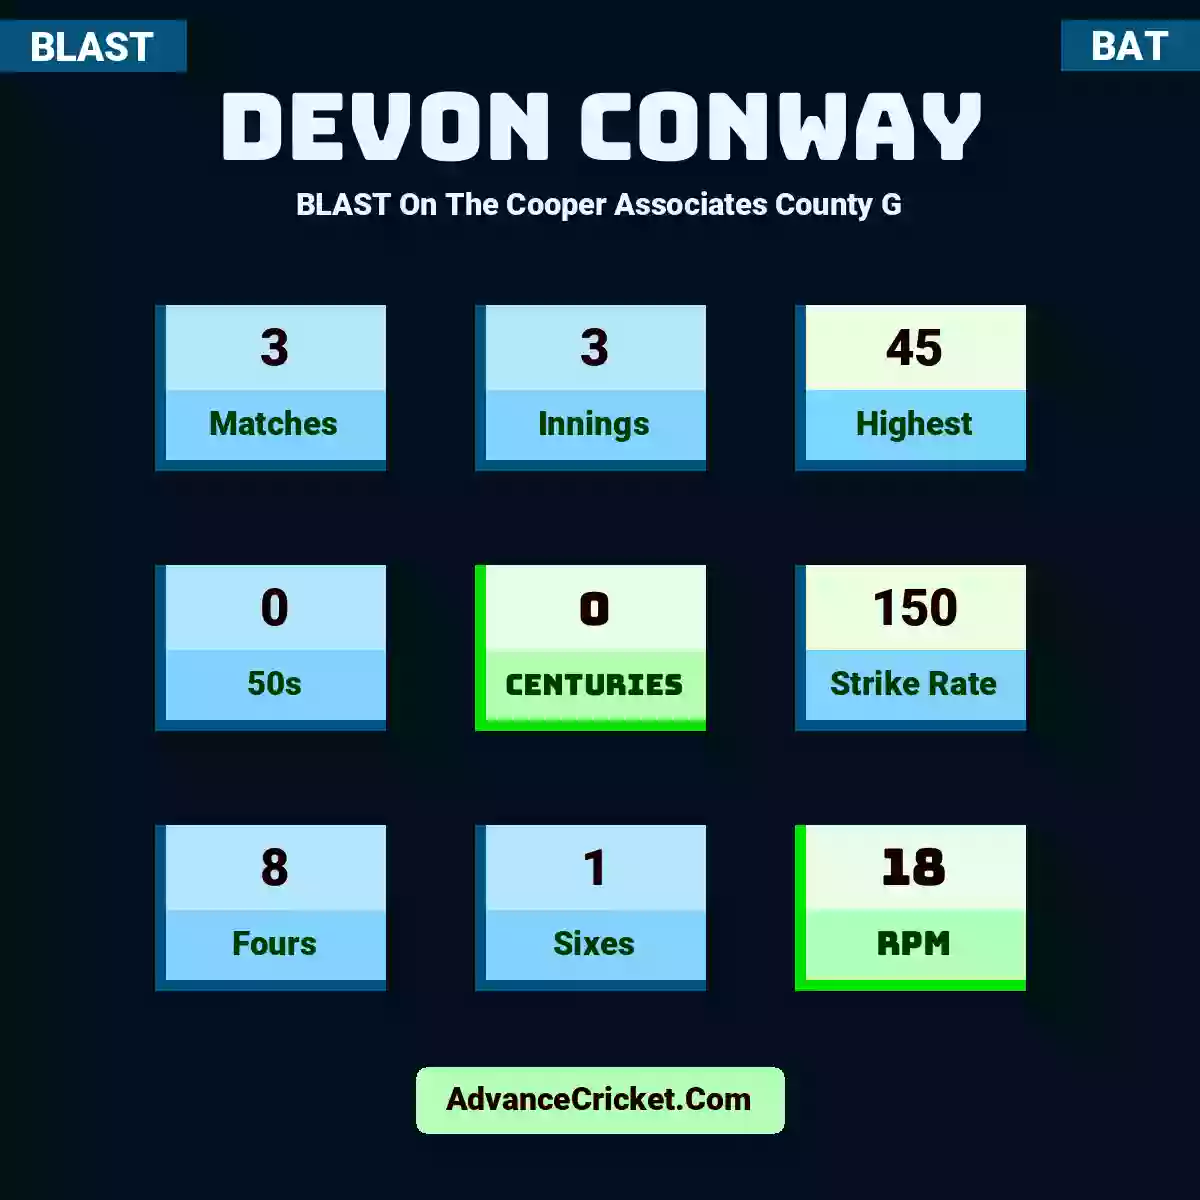 Devon Conway BLAST  On The Cooper Associates County G, Devon Conway played 3 matches, scored 45 runs as highest, 0 half-centuries, and 0 centuries, with a strike rate of 150. D.Conway hit 8 fours and 1 sixes, with an RPM of 18.